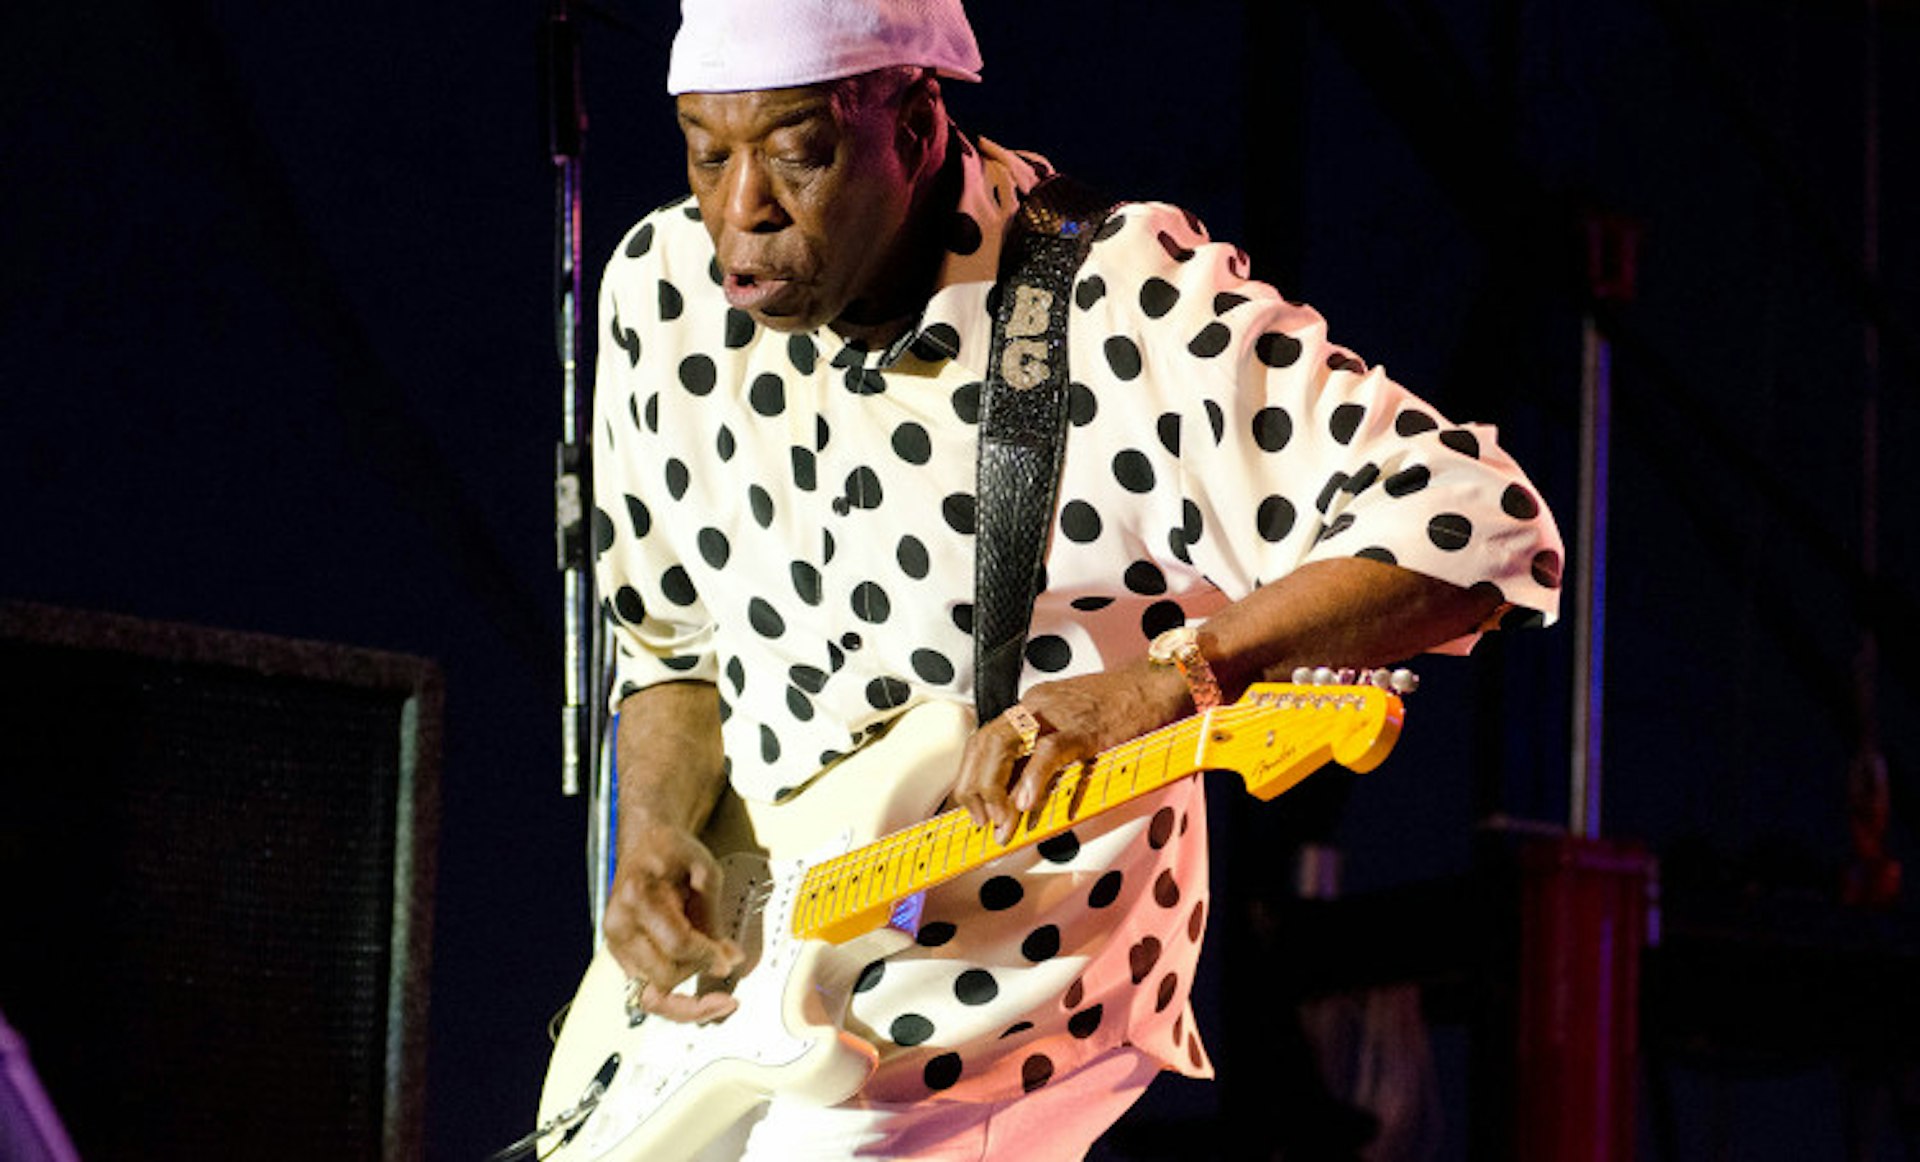 In January catch Buddy Guy playing the electric blues at his Legends club. Image by Bryan Thompson / CC BY 2.0